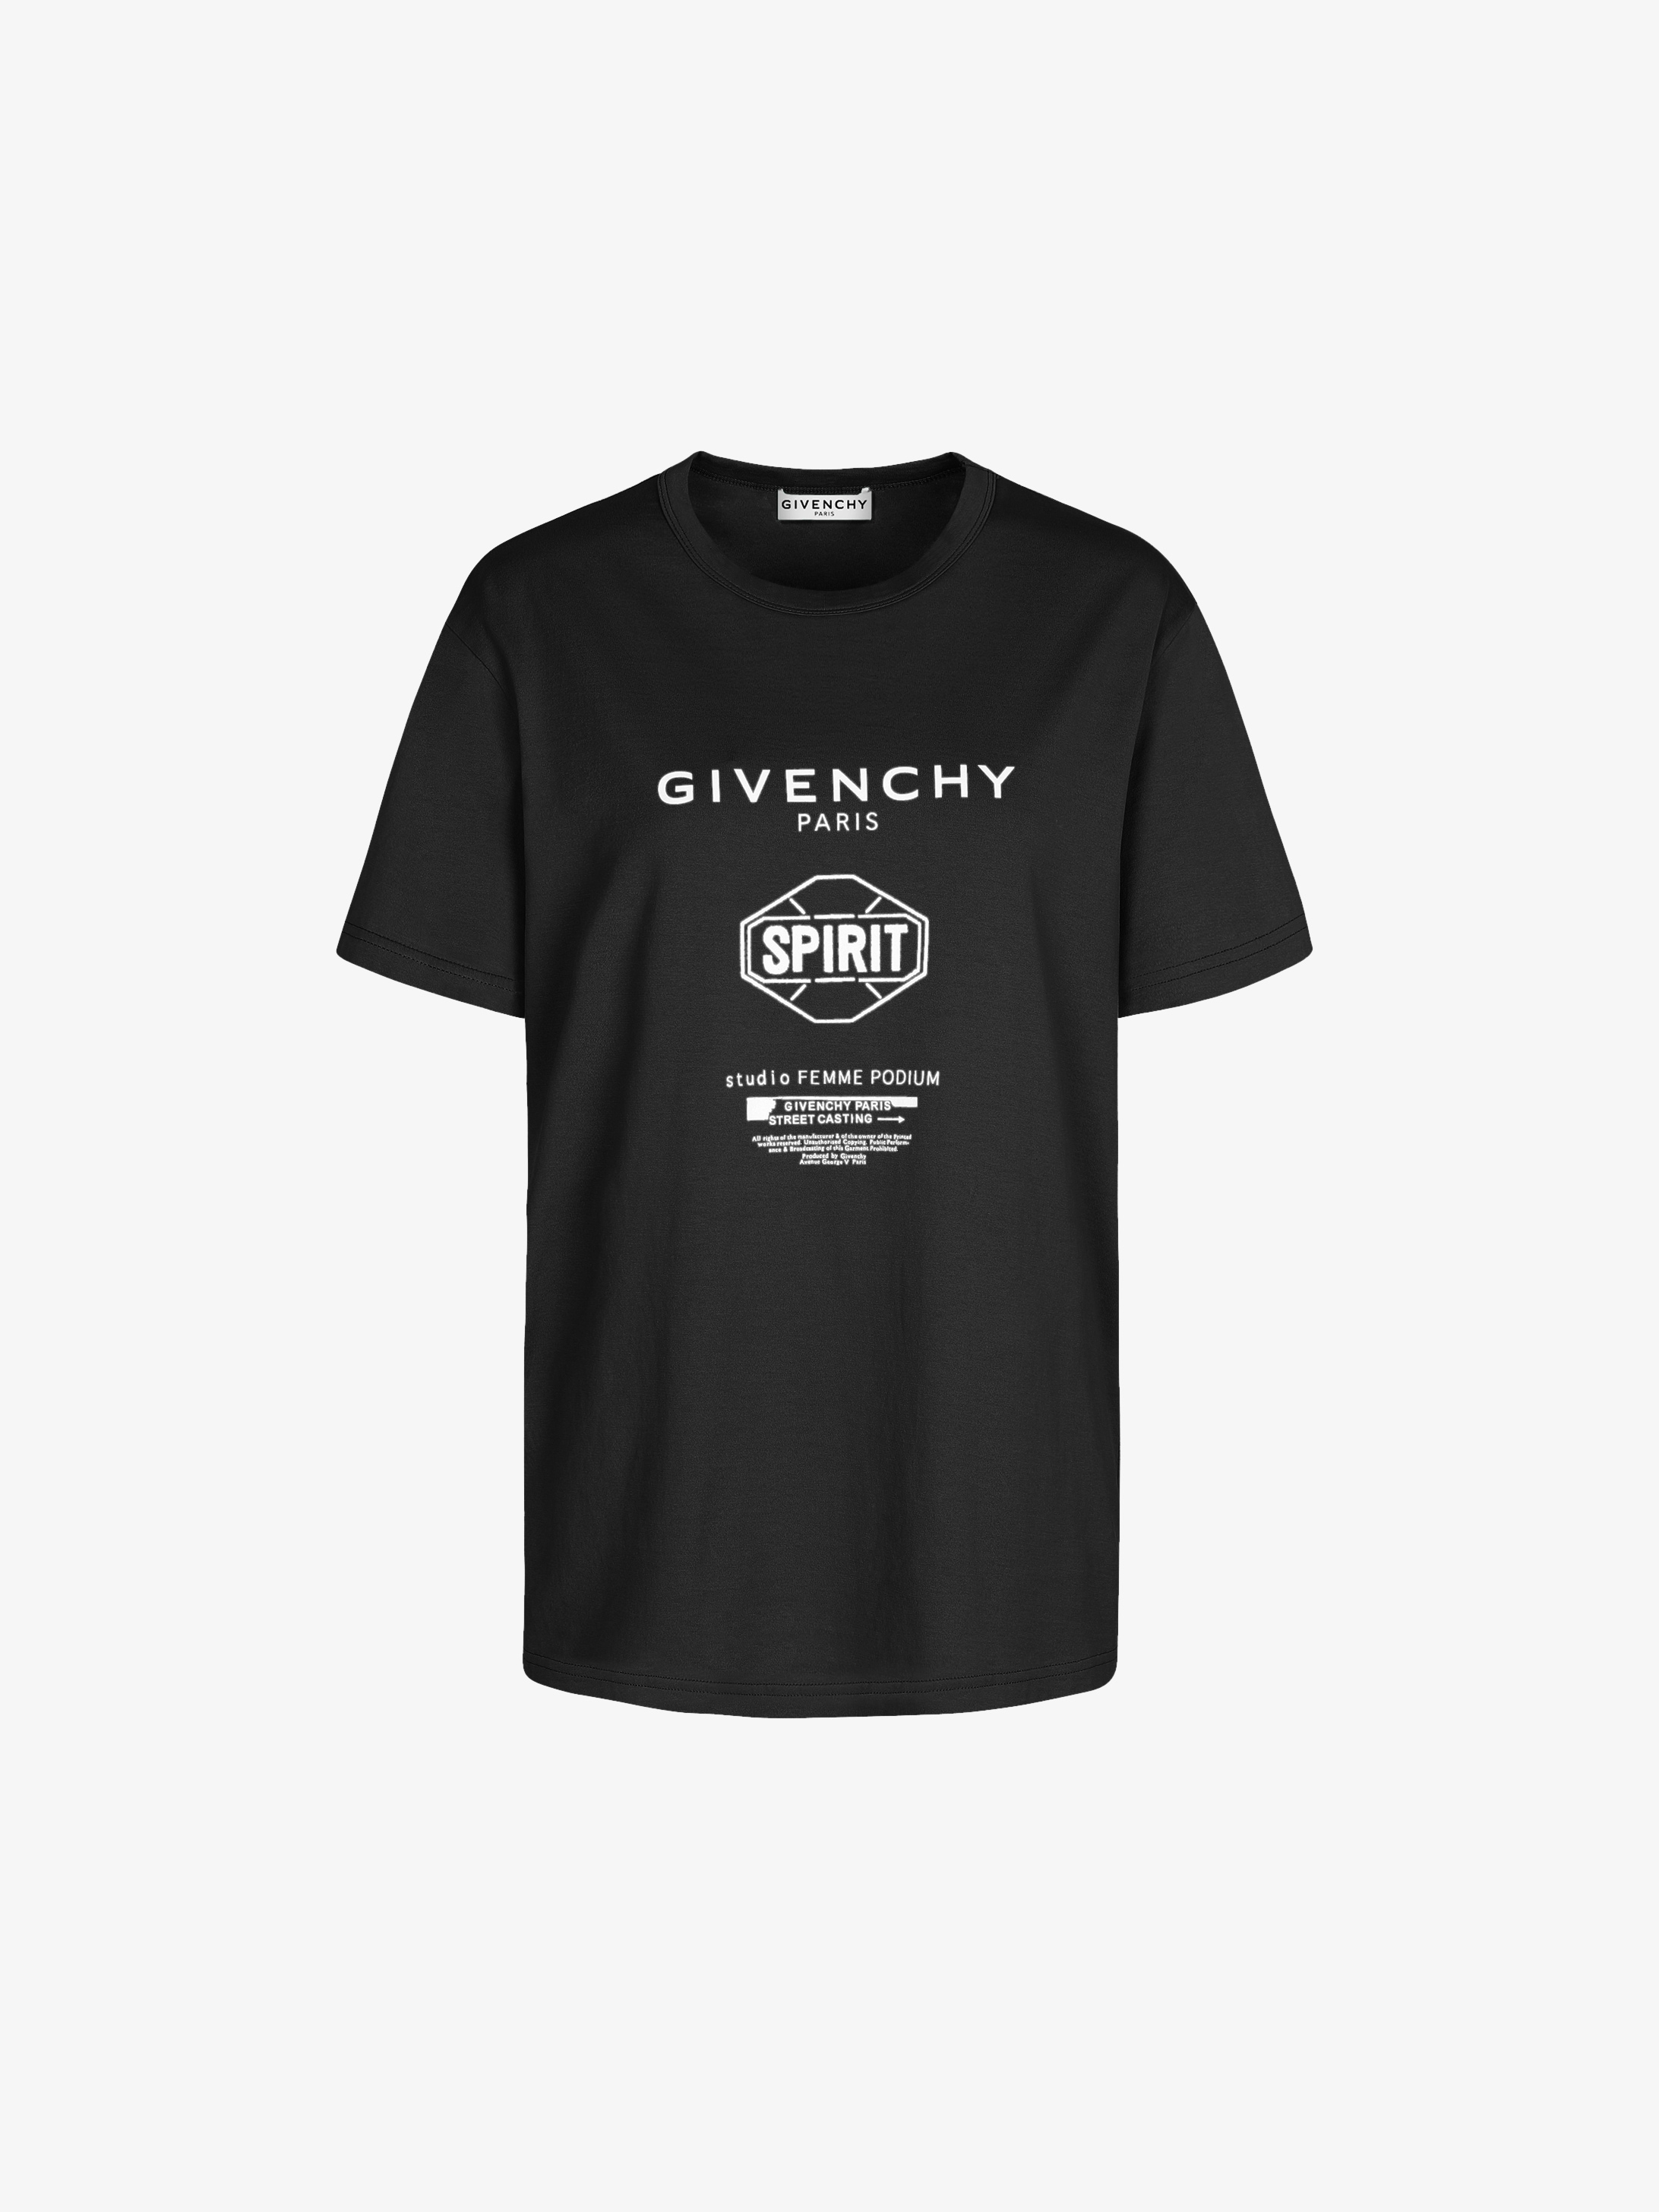 Givenchy paris vintage oversized t shirt – Best baby girl brands ...